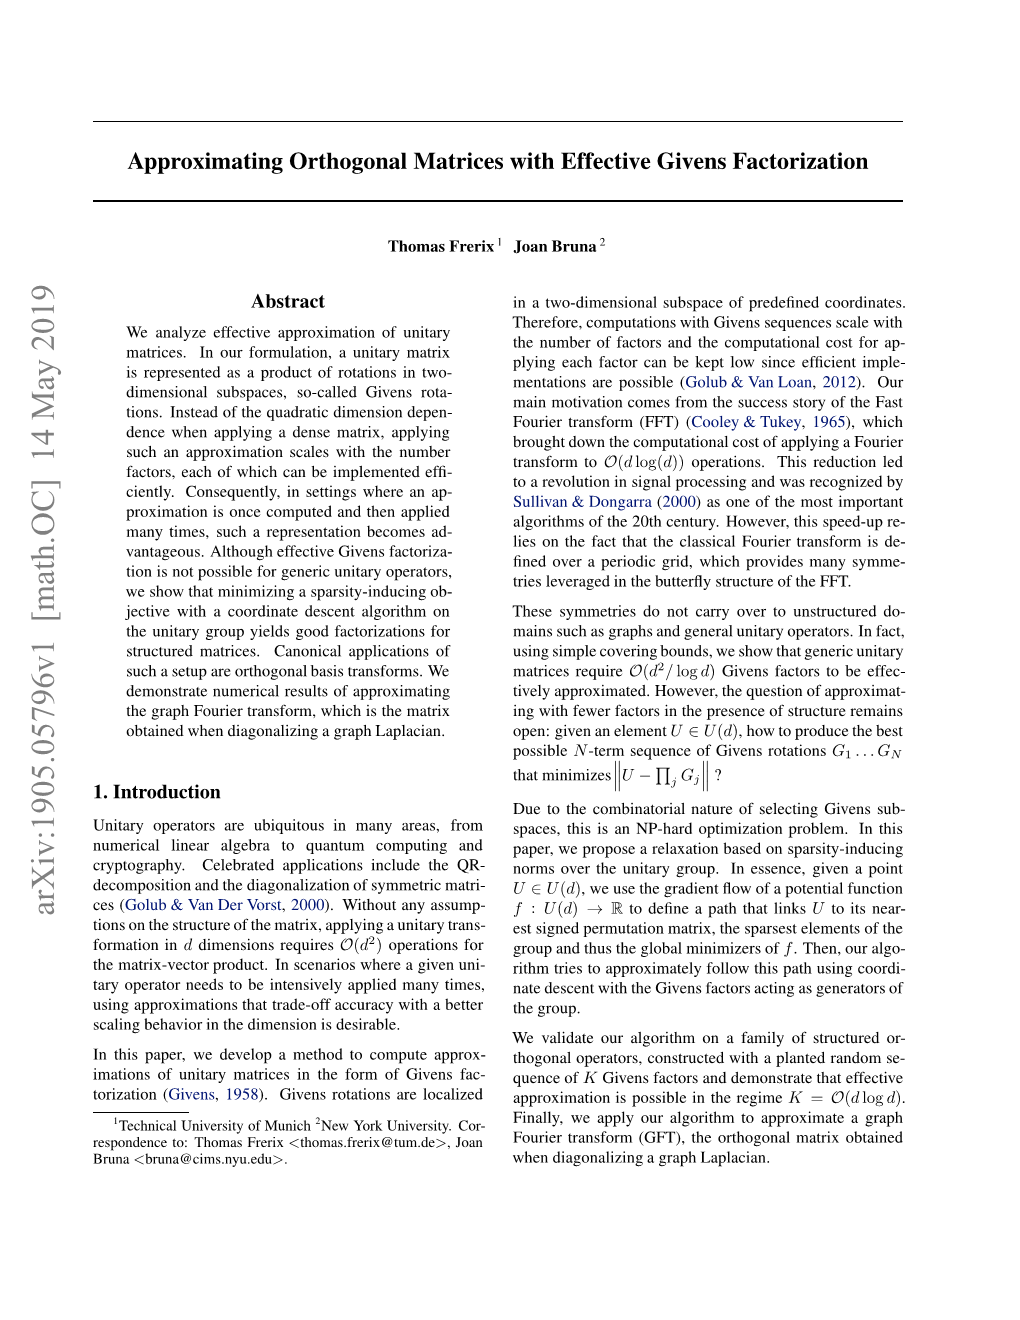 Approximating Orthogonal Matrices with Effective Givens Factorization